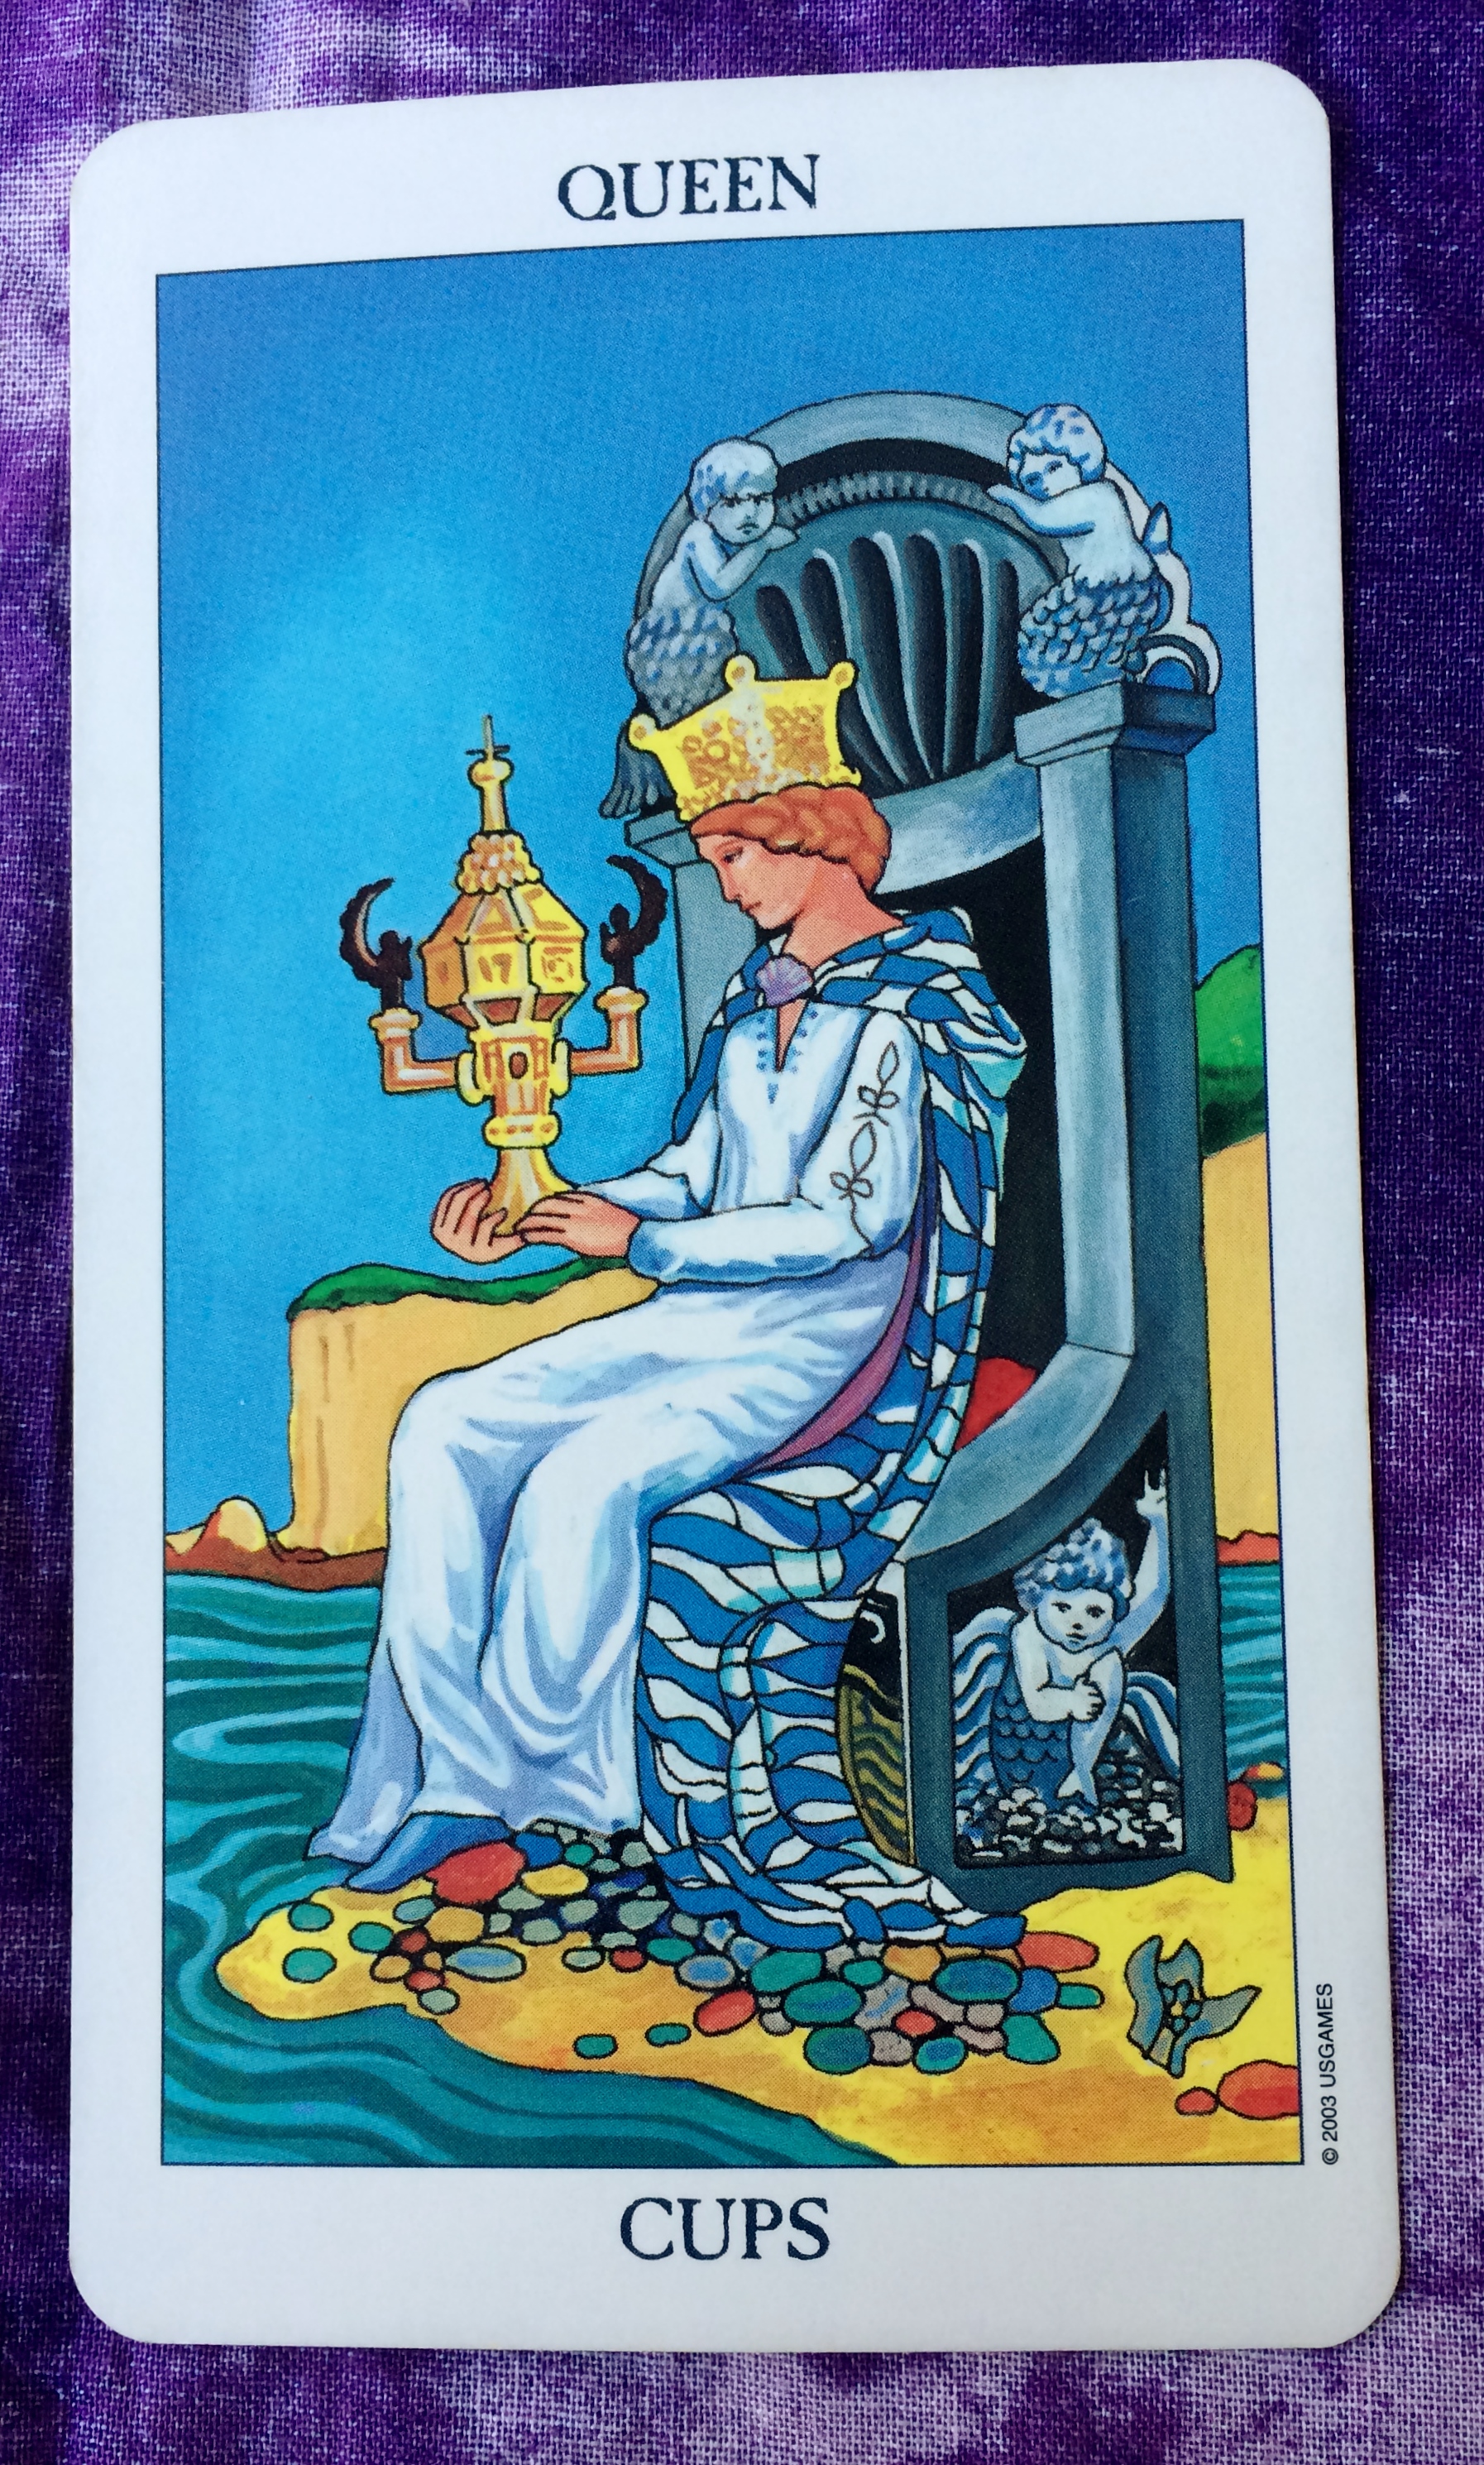 The Tarot card for today, Saturday, and Sunday is the Queen of Cups. 